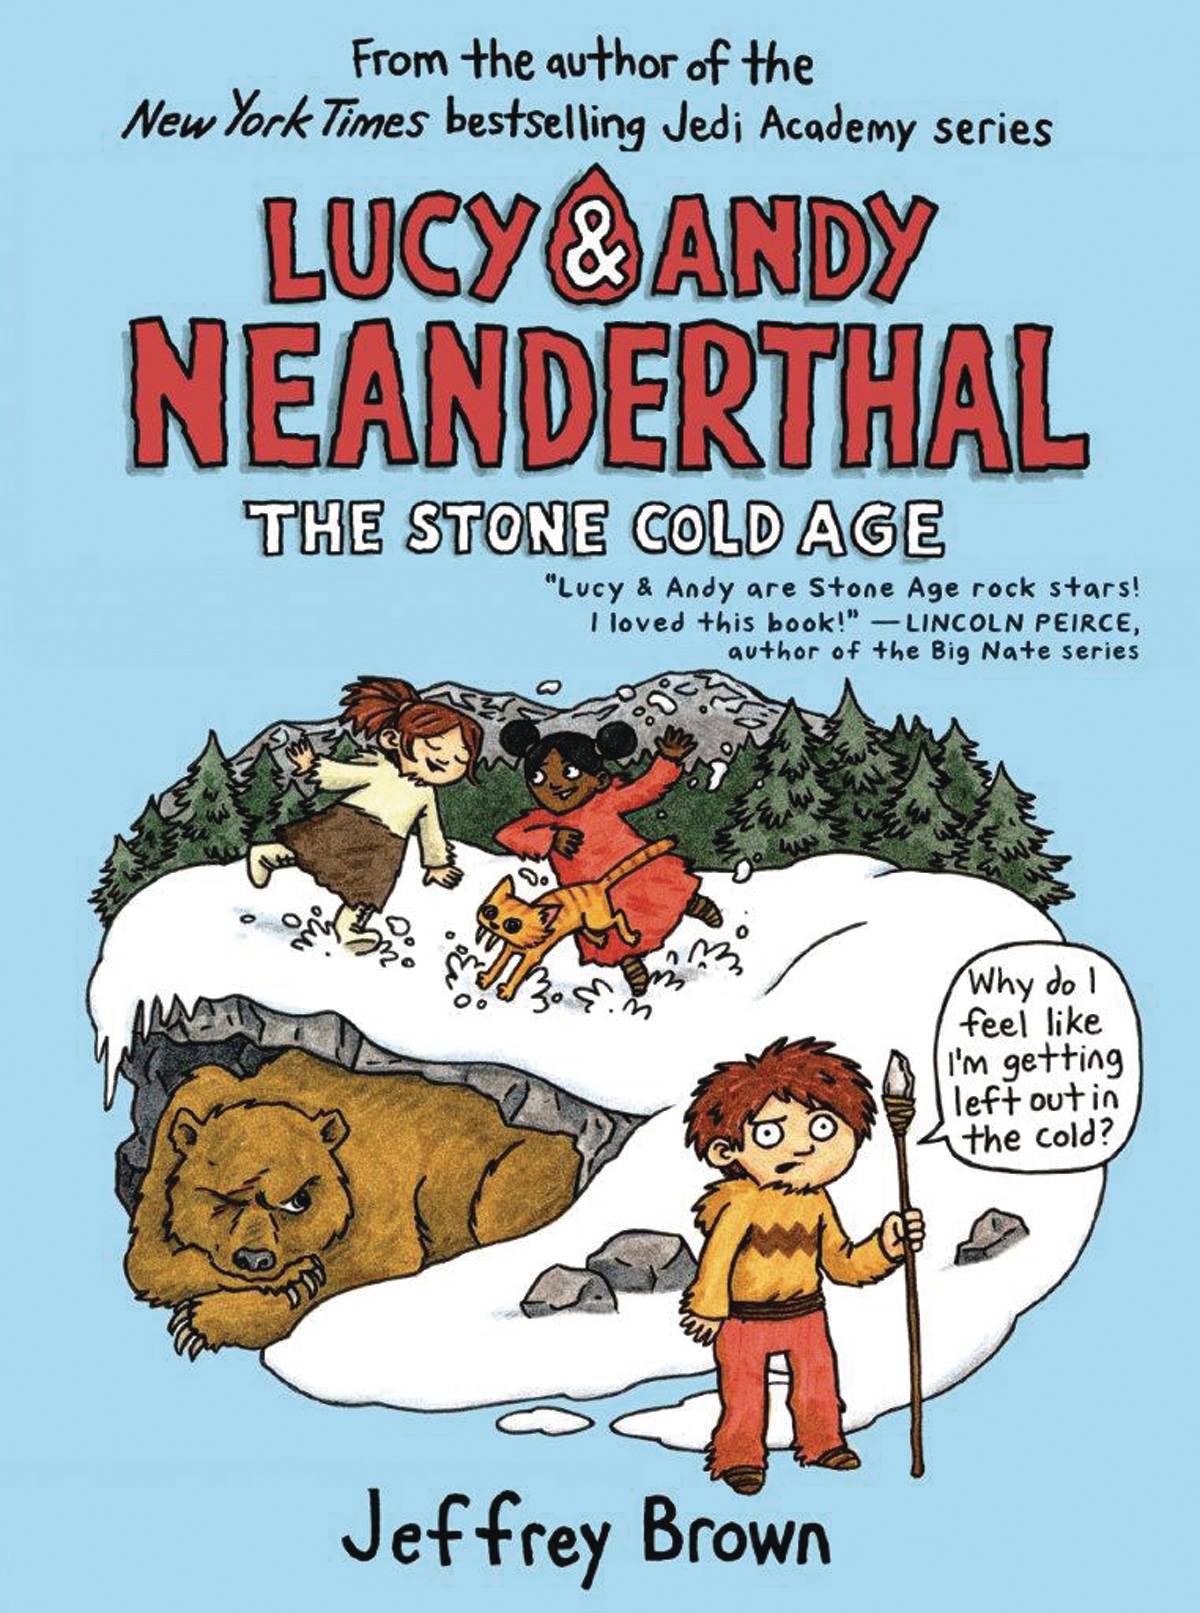 LUCY & ANDY NEANDERTHAL VOL 02: STONE COLD AGE HC